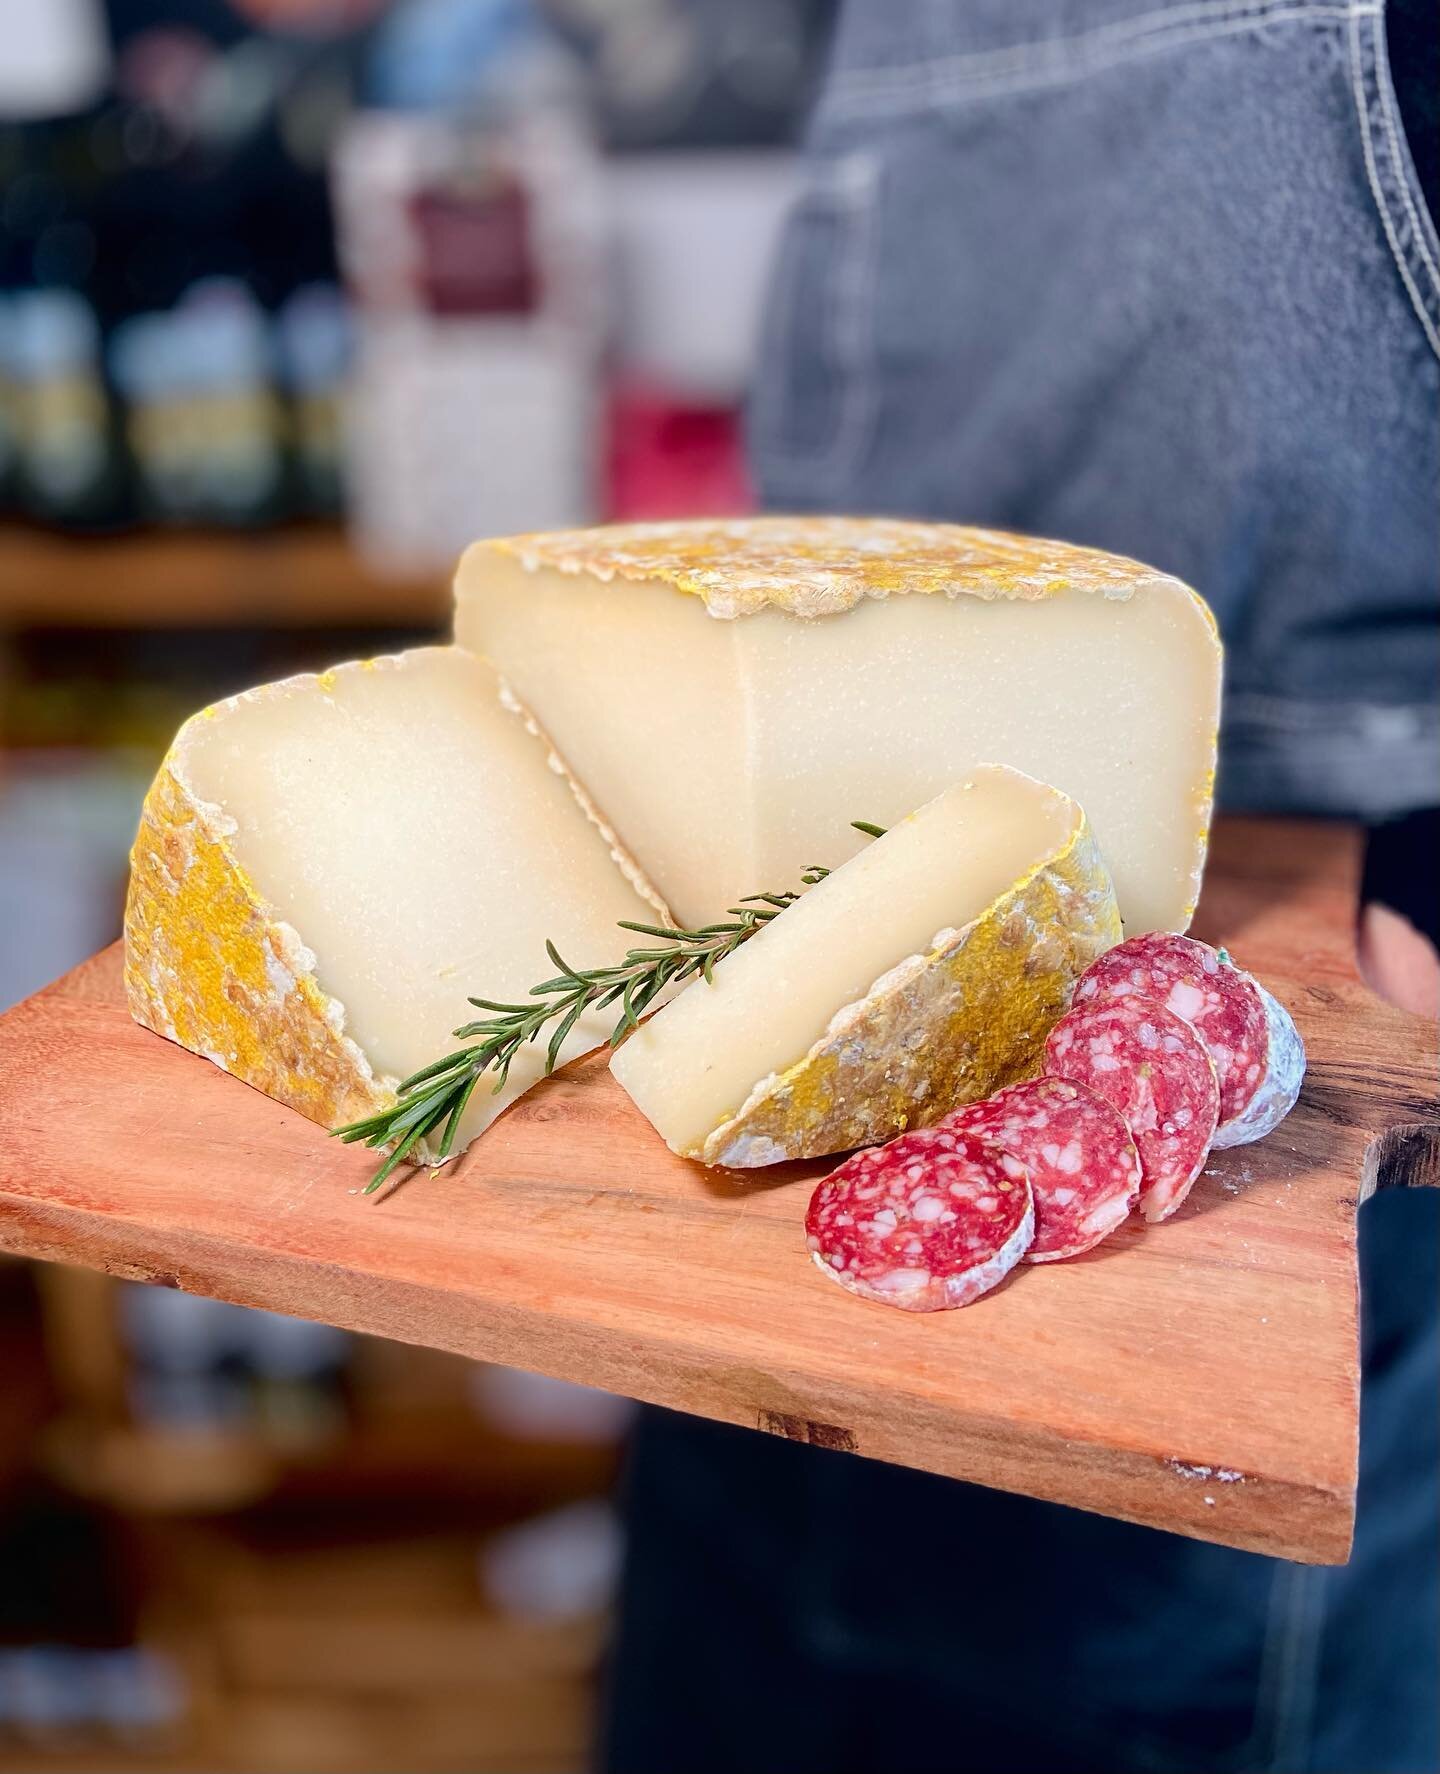 Ossau Iraty is a semi-firm sheep's milk cheese from the mountains of Pyrenees 🐑🏔
Said to be one of the oldest cheeses ever made, the smooth and creamy texture of this cheese is contrasted perfectly by its amazing rustic rind 🧀

If you are looking 